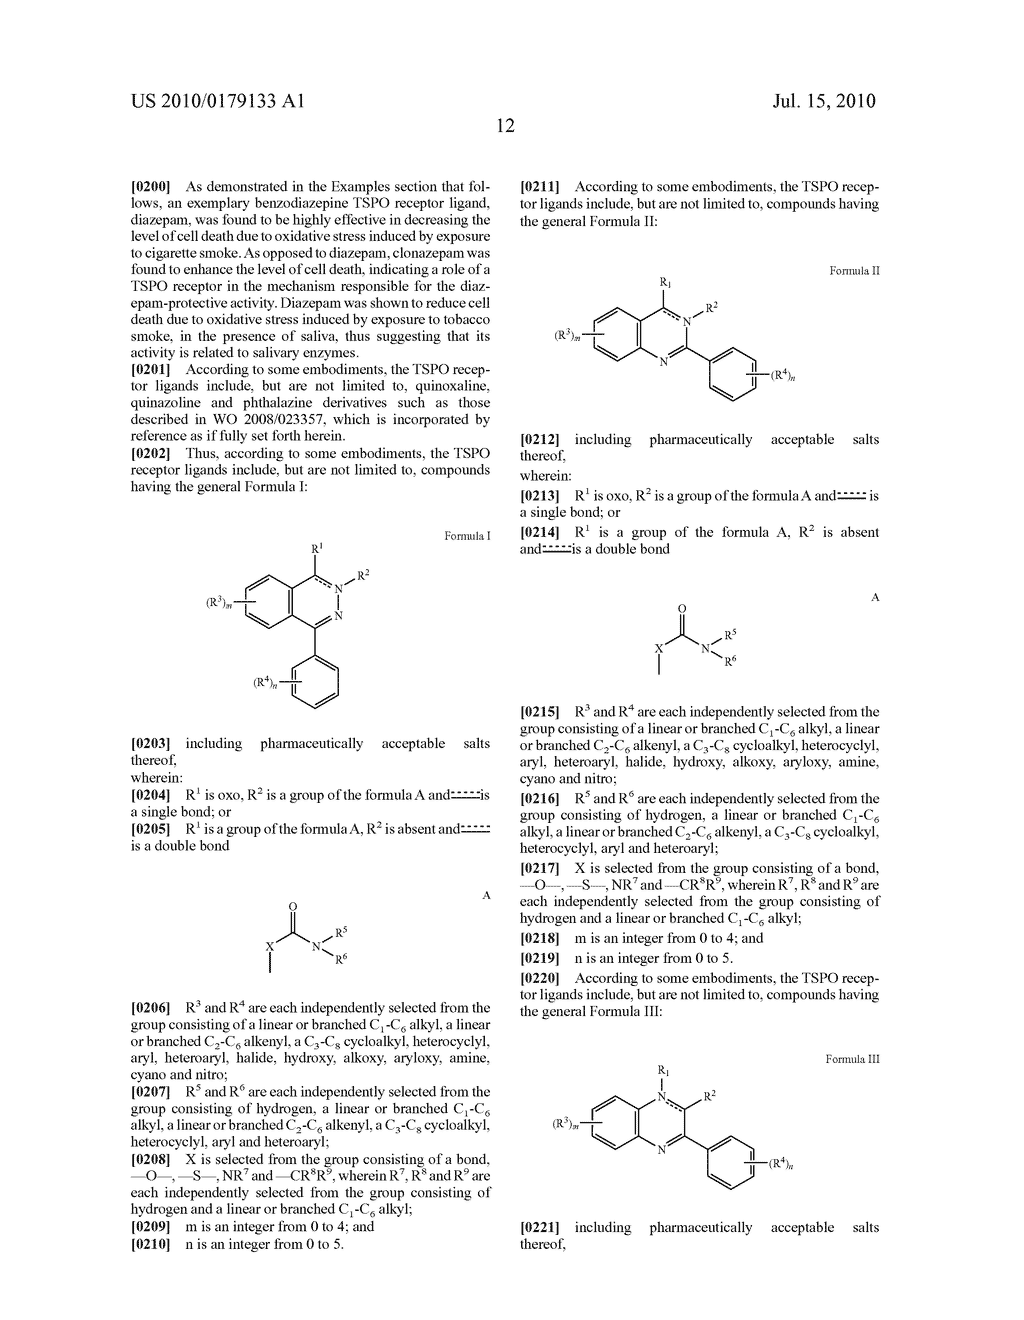 COMPOSITIONS, ARTICLES AND METHODS COMRISING TSPO LIGANDS FOR PREVENTING OR REDUCING TOBACCO-ASSOCIATED DAMAGE - diagram, schematic, and image 32